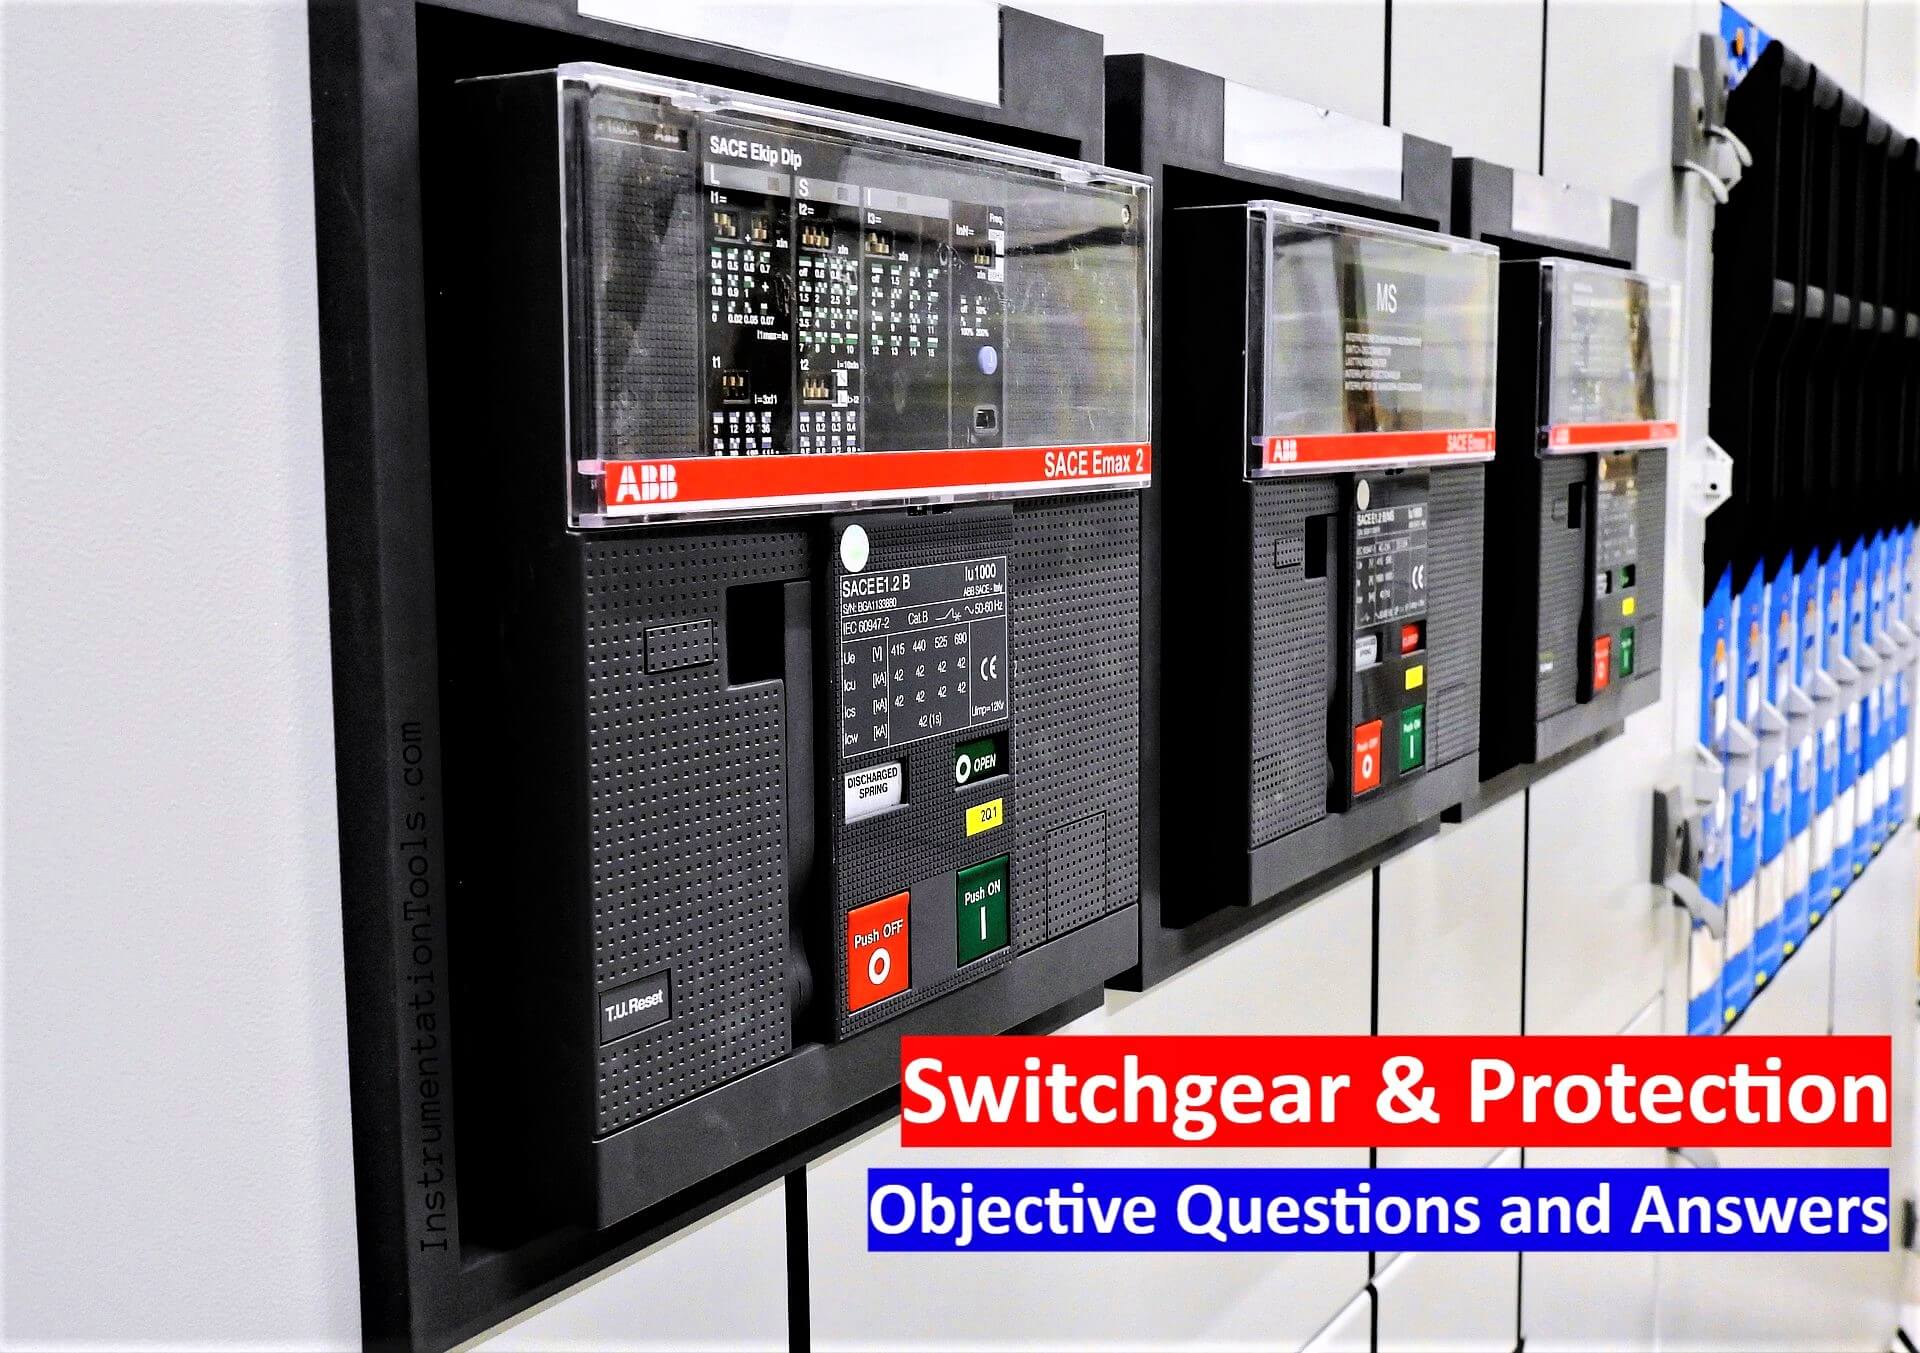 Switchgear & Protection Objective Questions and Answers